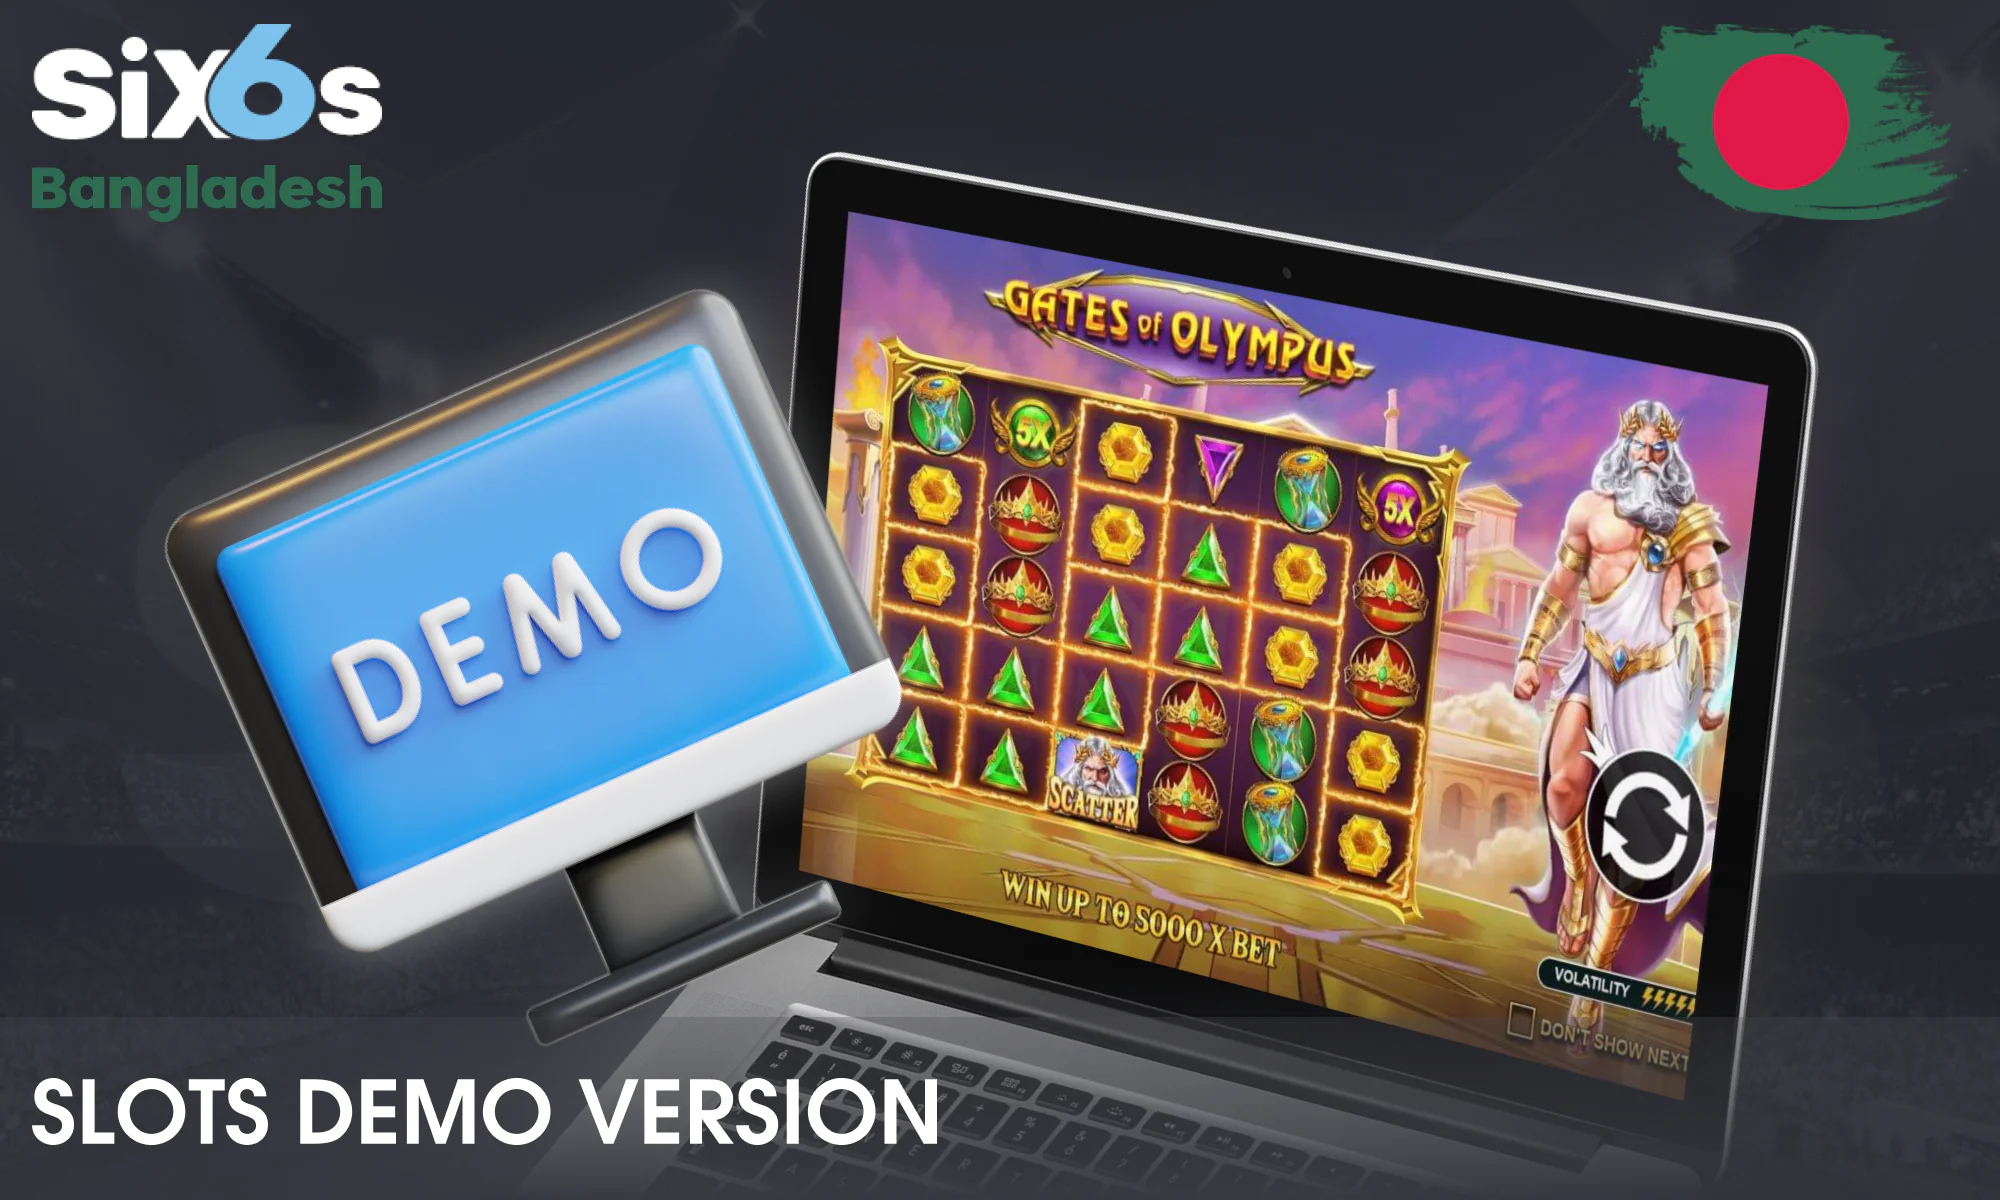 Six6s provides Slots demo version without the risk of losing real money.